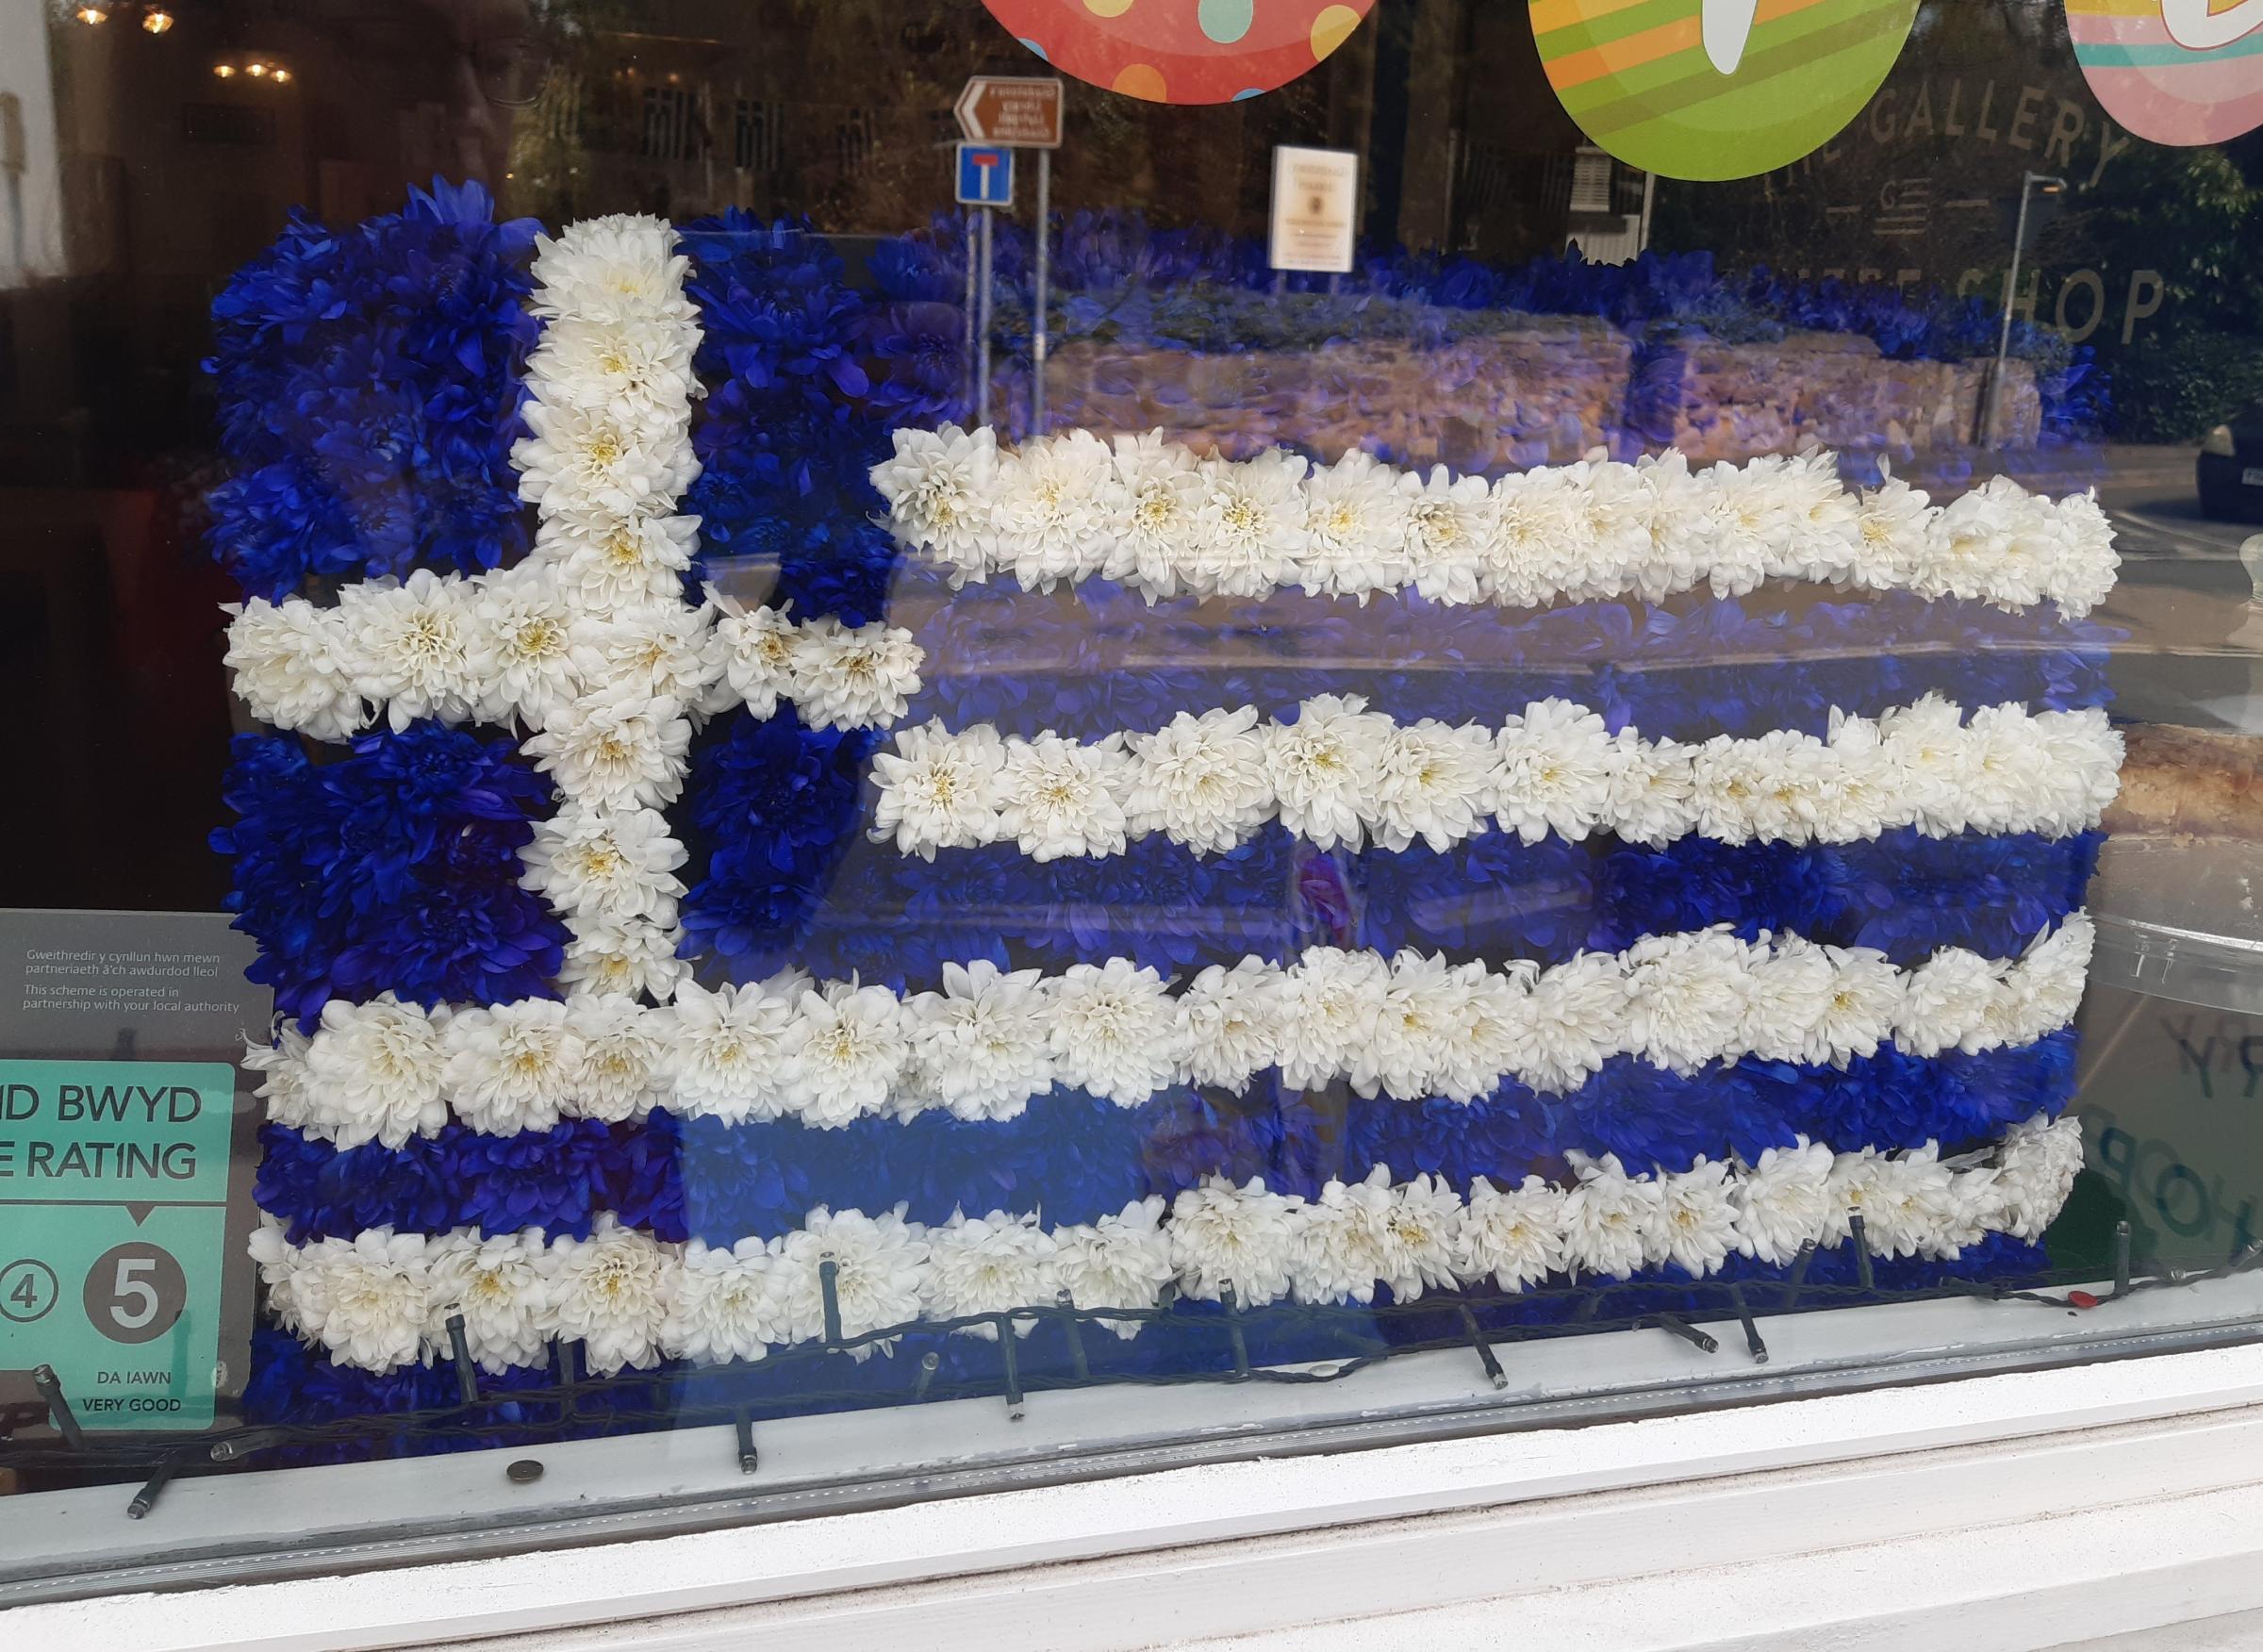 Greek flag floral tribute to Spiros Kavvadias, in the window of The Gallery, in Hawarden.